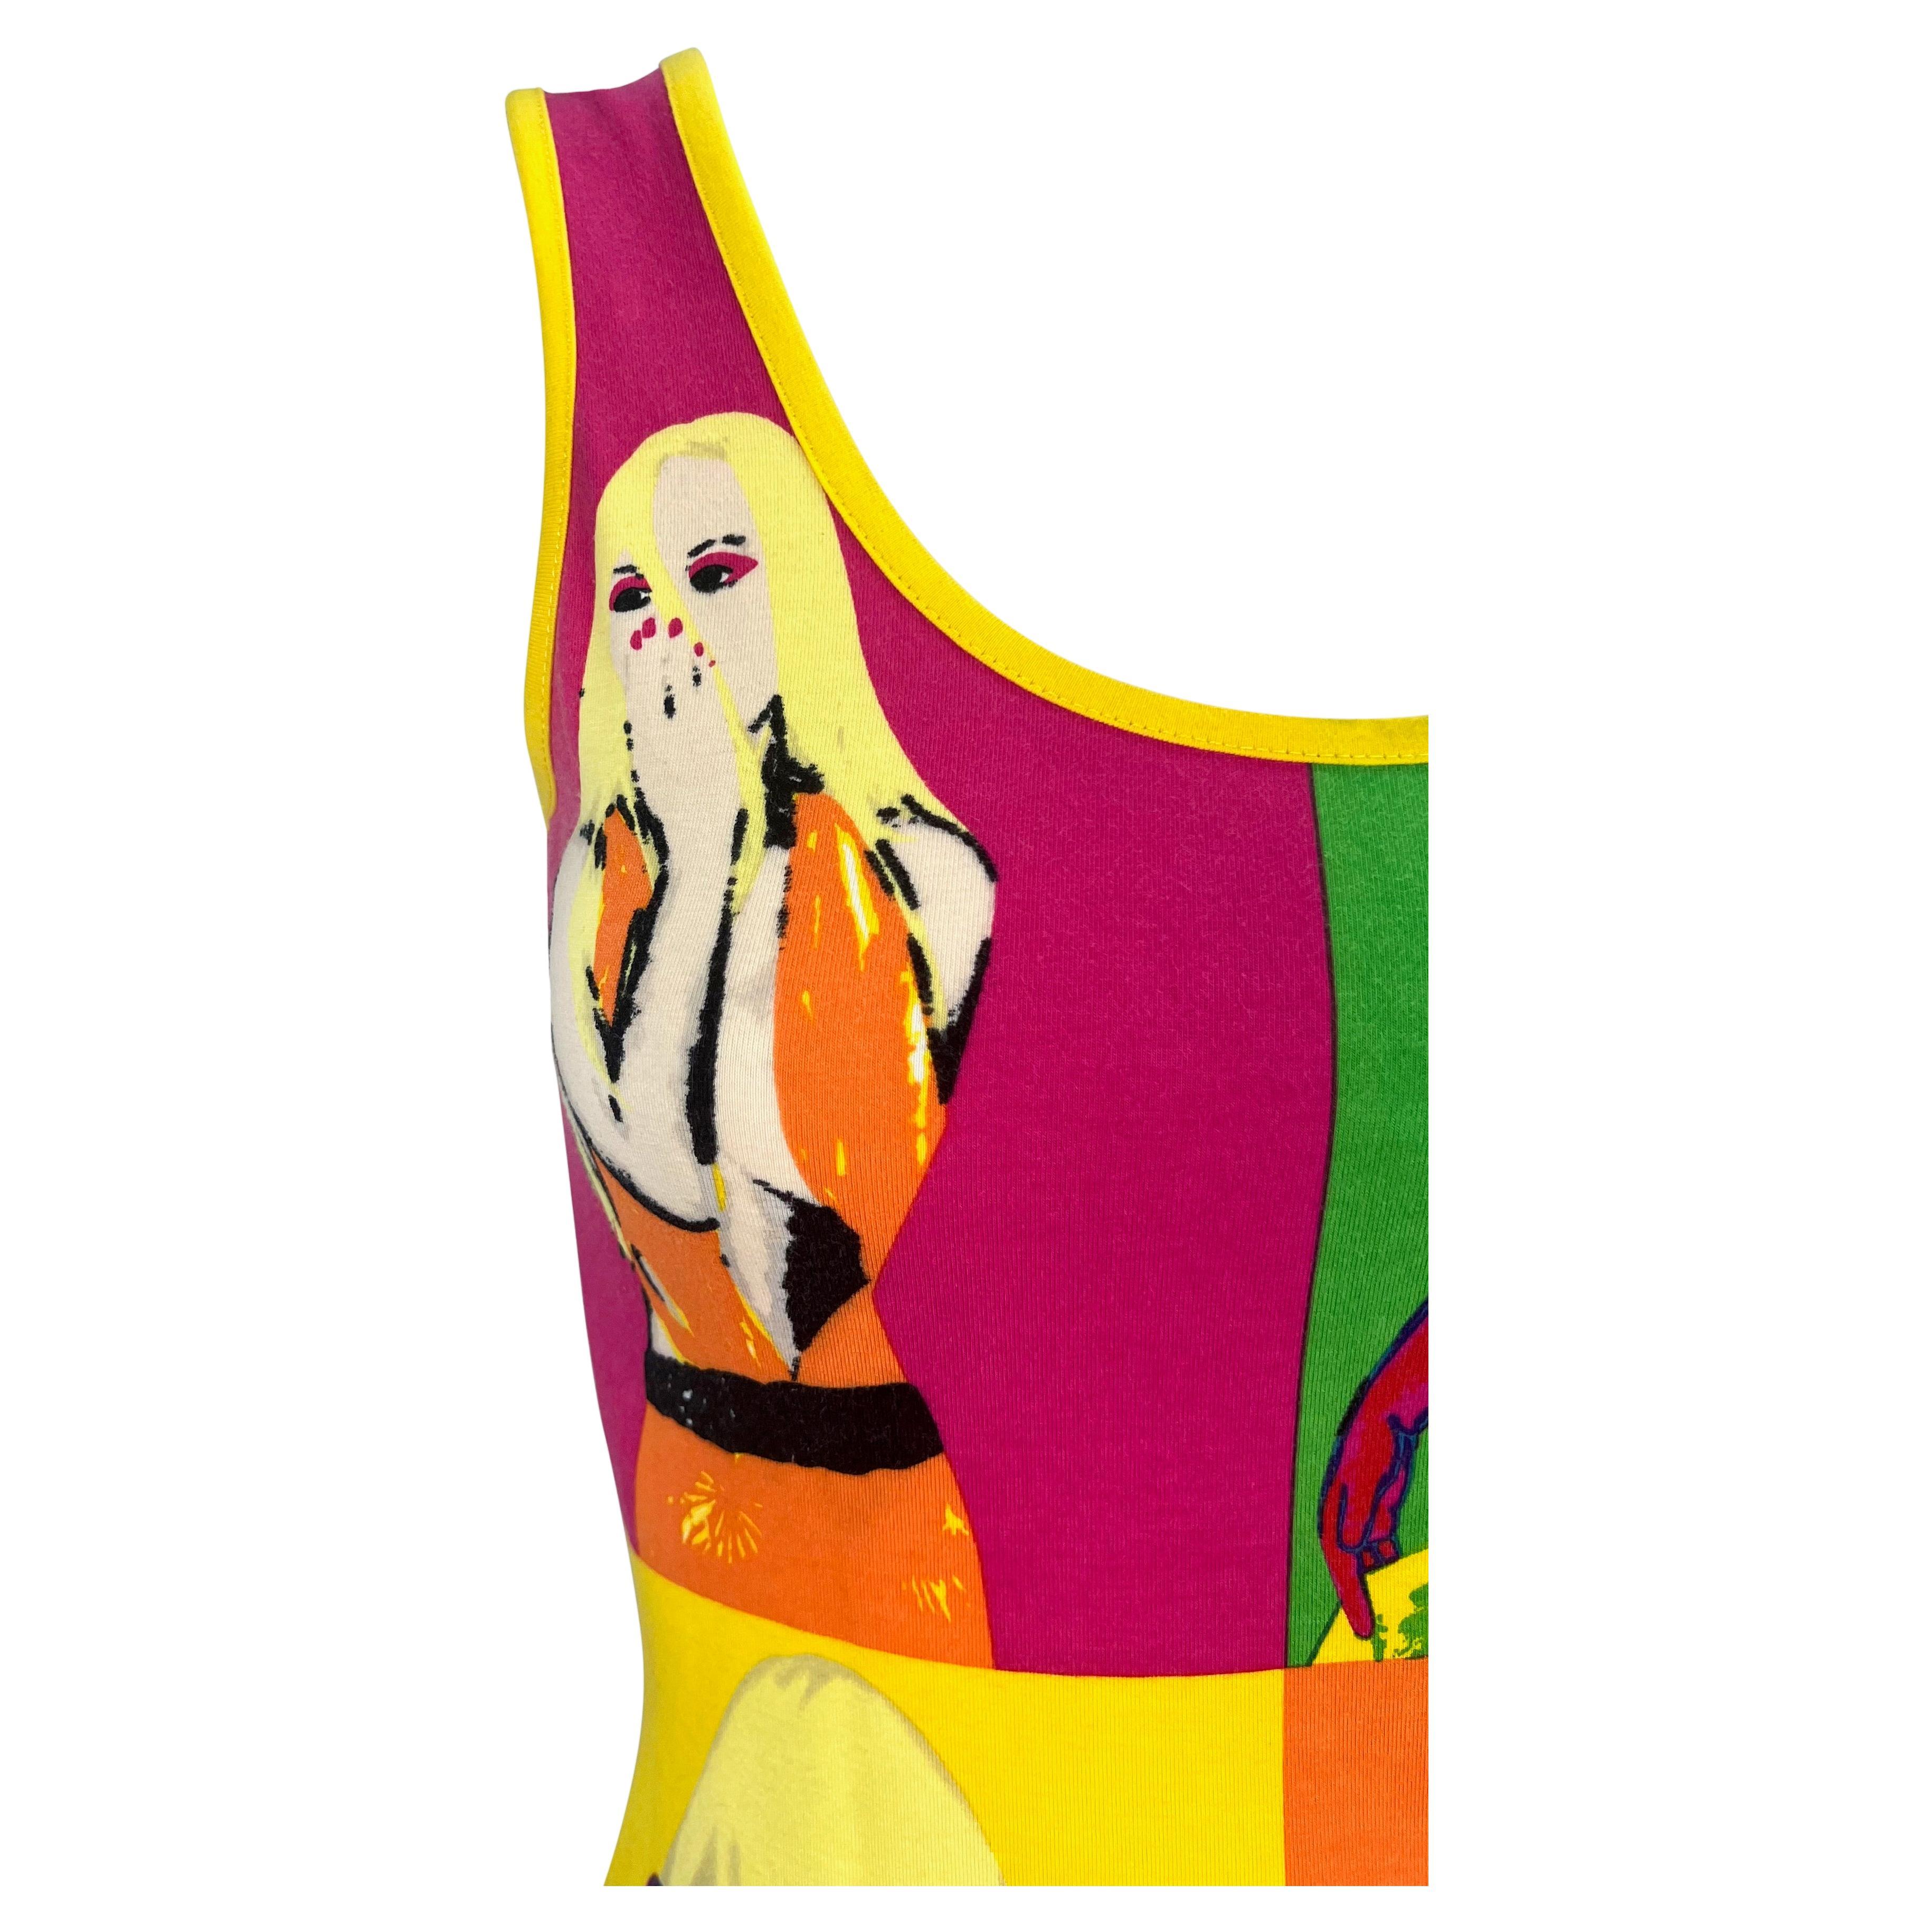 S/S 2004 Versace by Donatella Runway Neon Pop-Art Warhol Stretch Tank Top In Excellent Condition For Sale In West Hollywood, CA